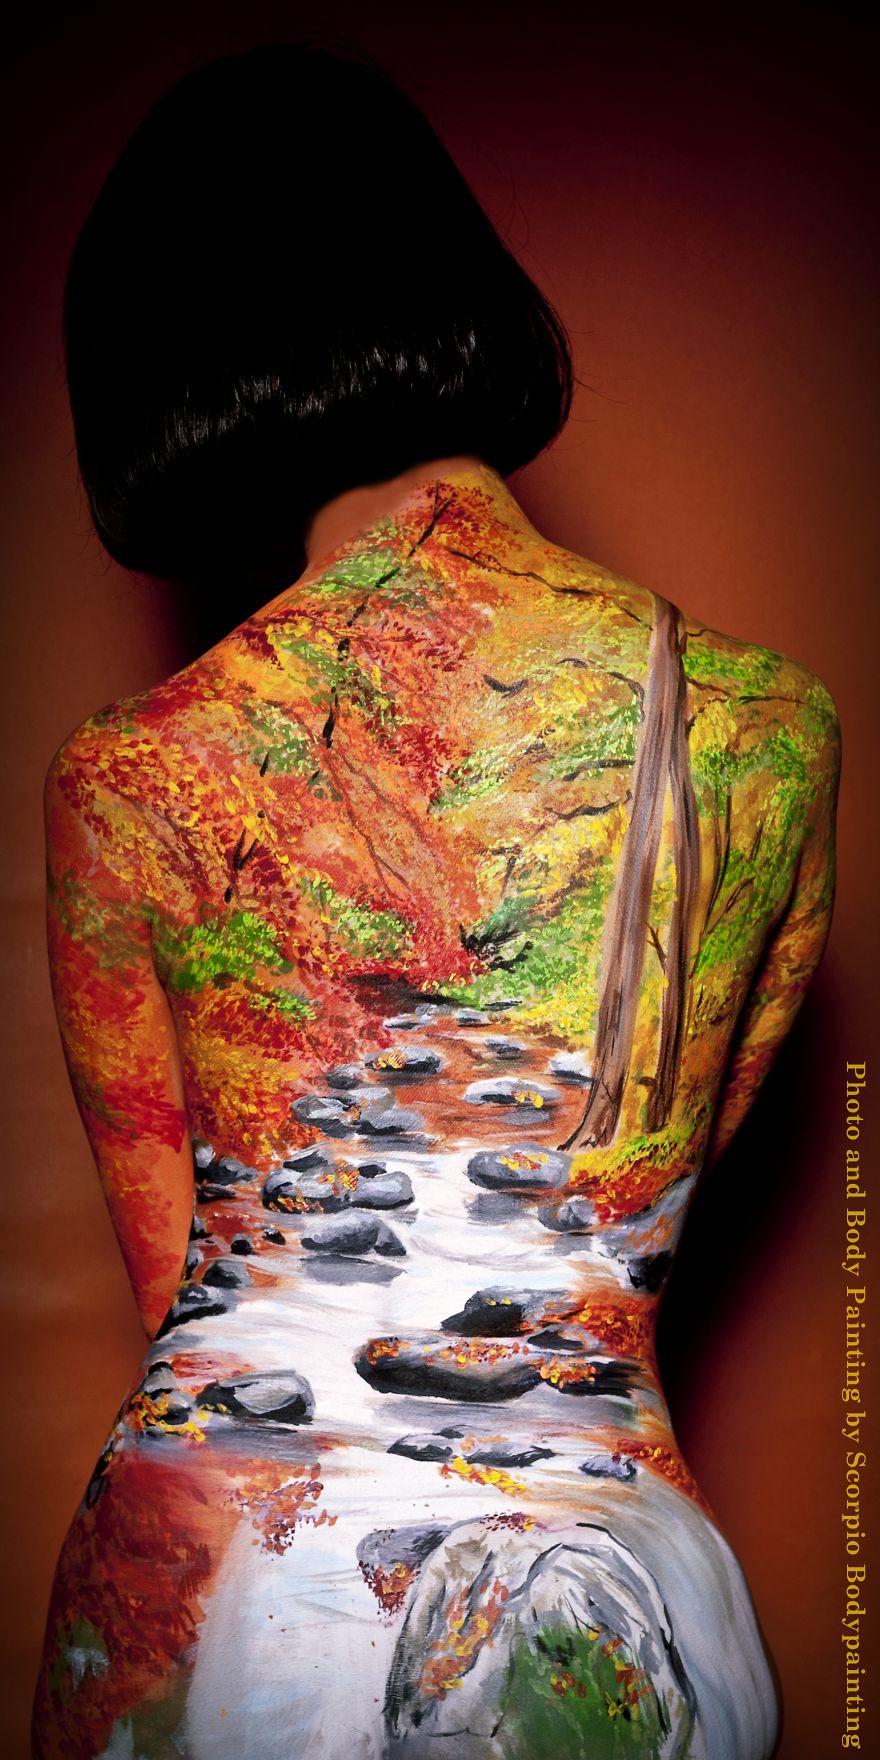 I Use Makeup To Create Stunning Landscapes...on Human Bodies